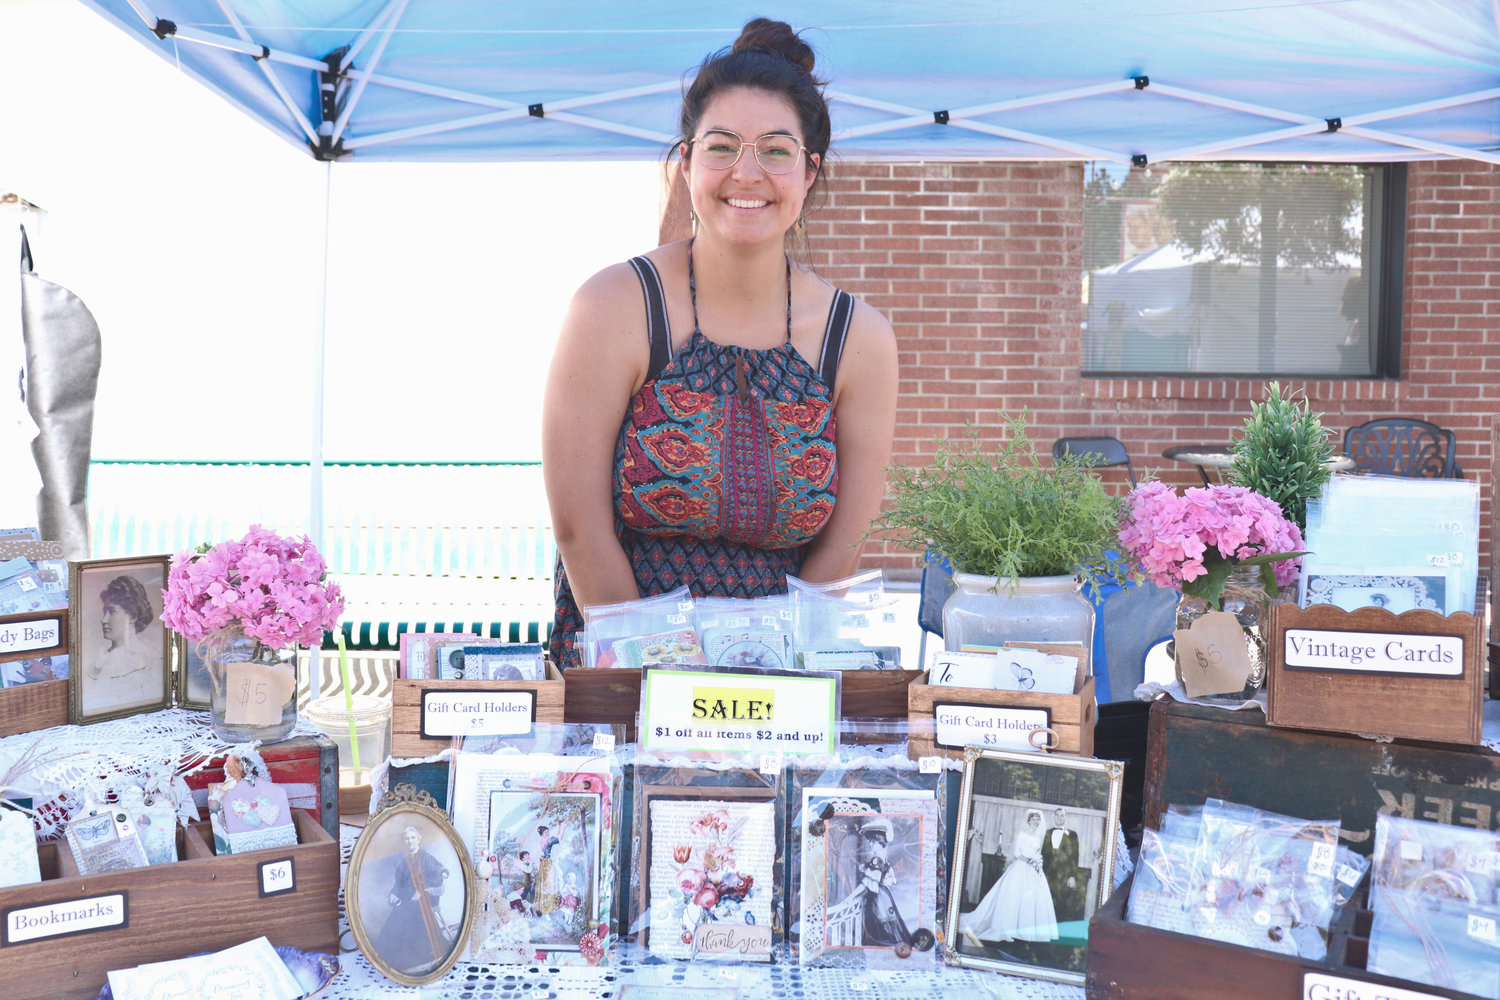 Hobbyist Alaina Osuna of Rainier sells her handmade vintage-inspired cards, bookmarks and other wares at a stall during Antique Fest in downtown Centralia on Sunday.